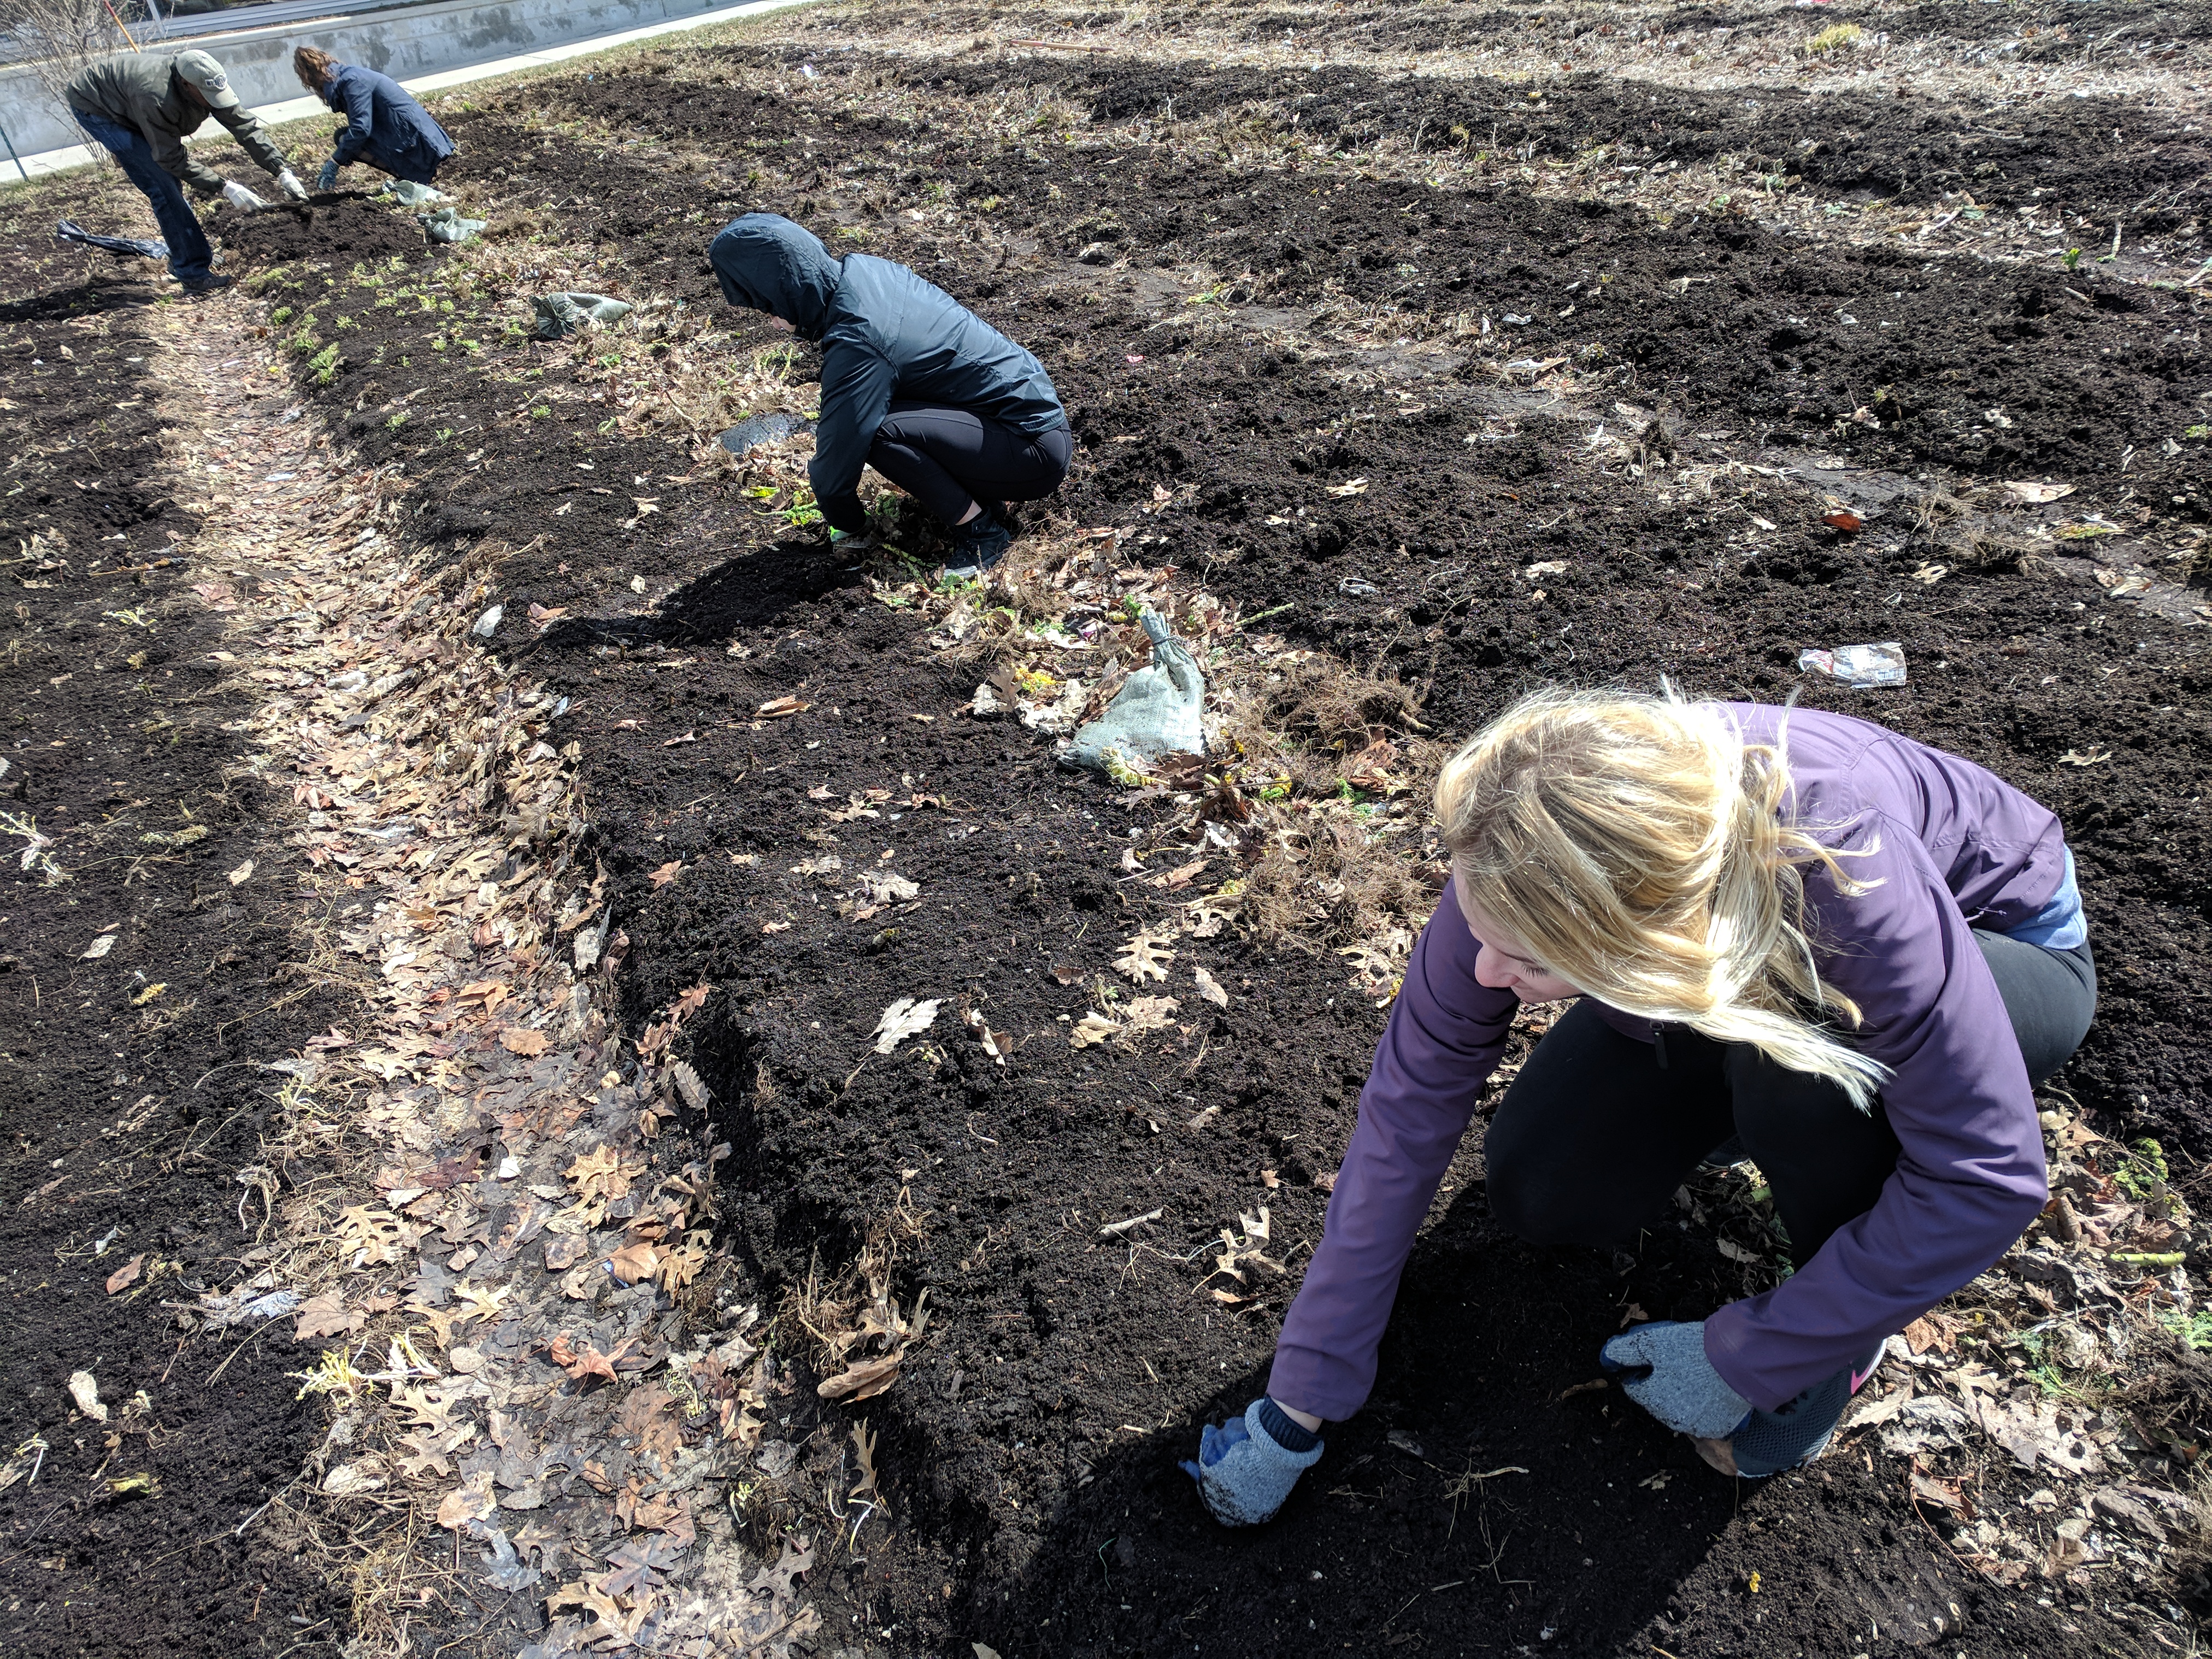 Students are pulling weeds from recently uncovered garden beds